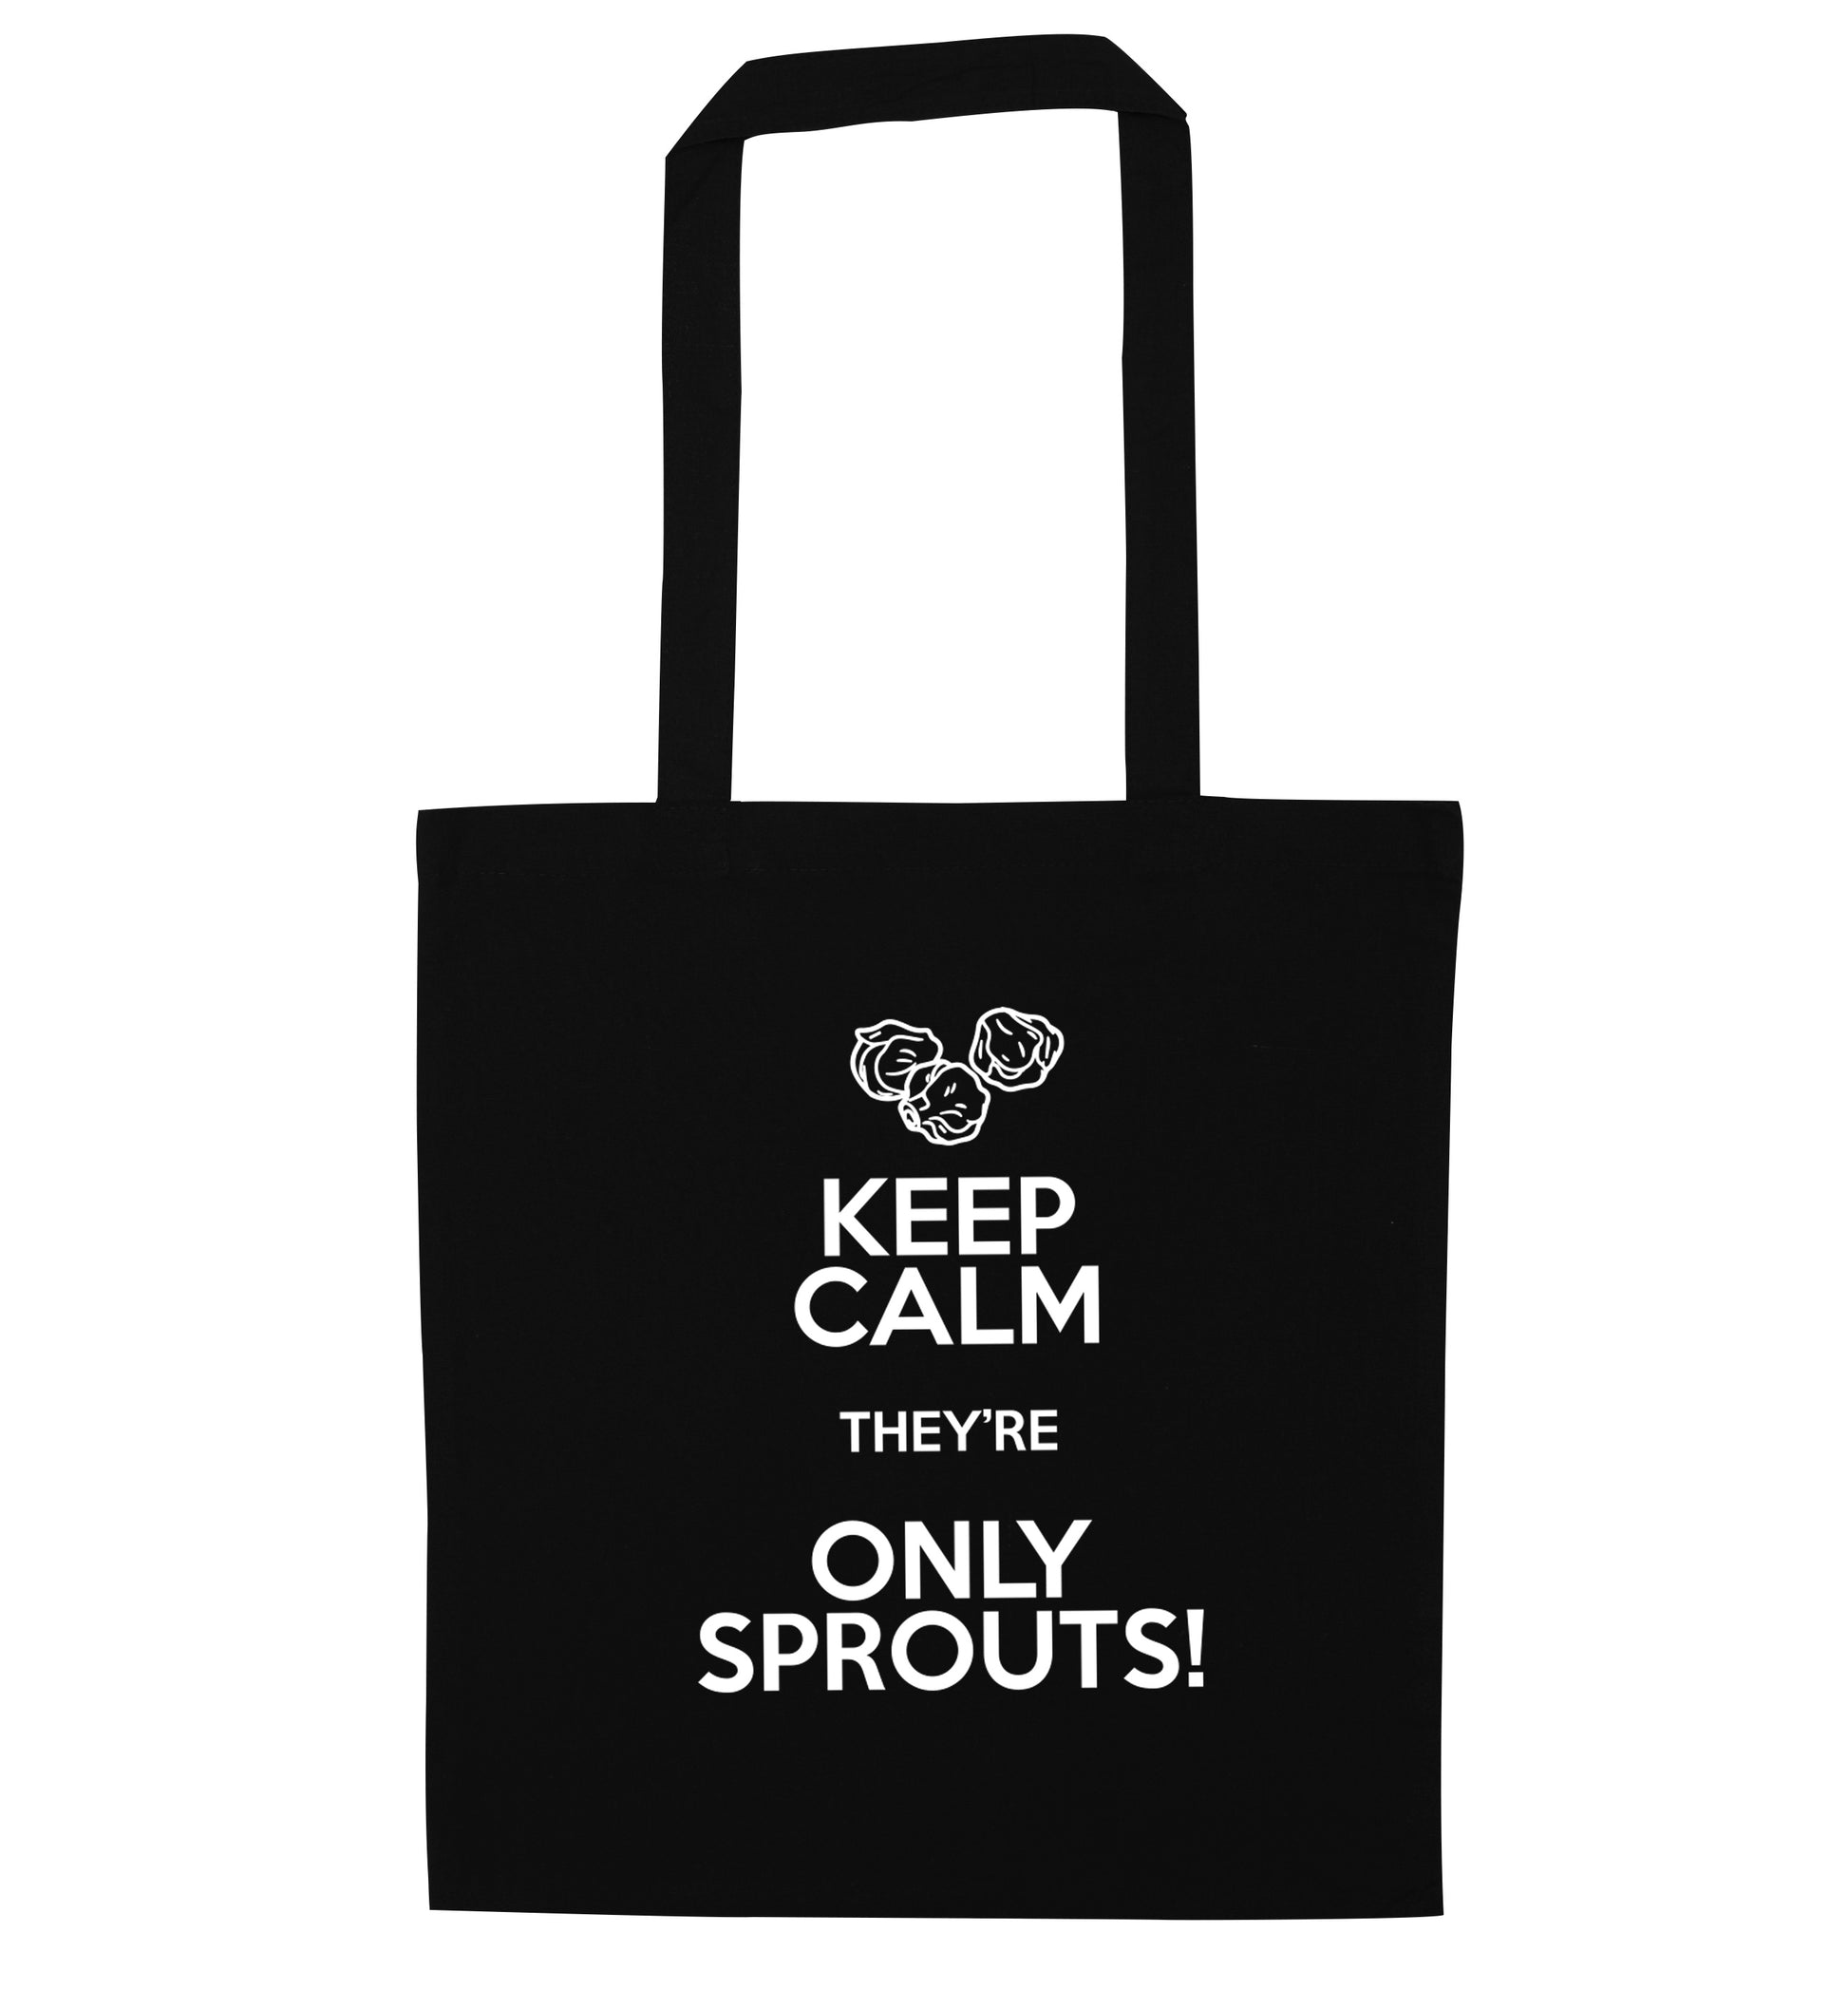 Keep calm they're only sprouts black tote bag